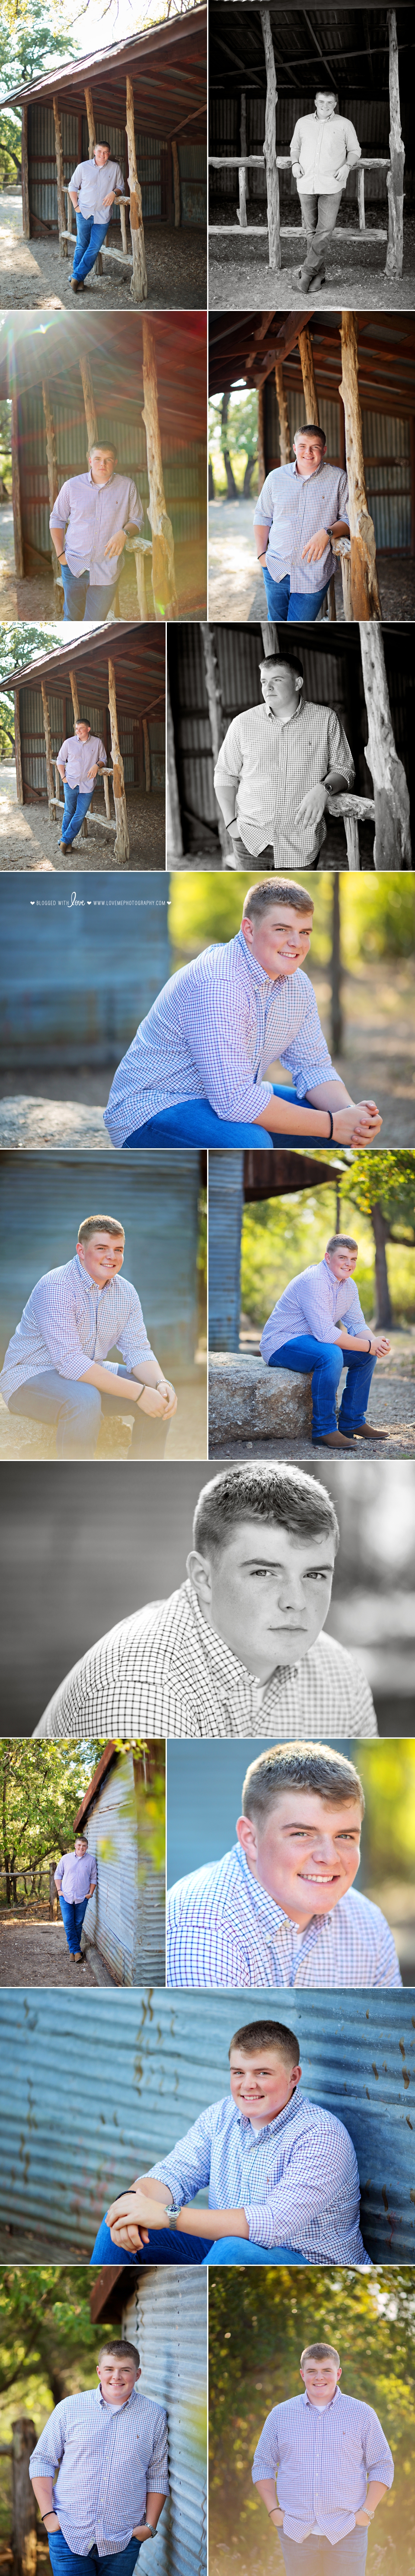 Collage of senior portraits of a guy